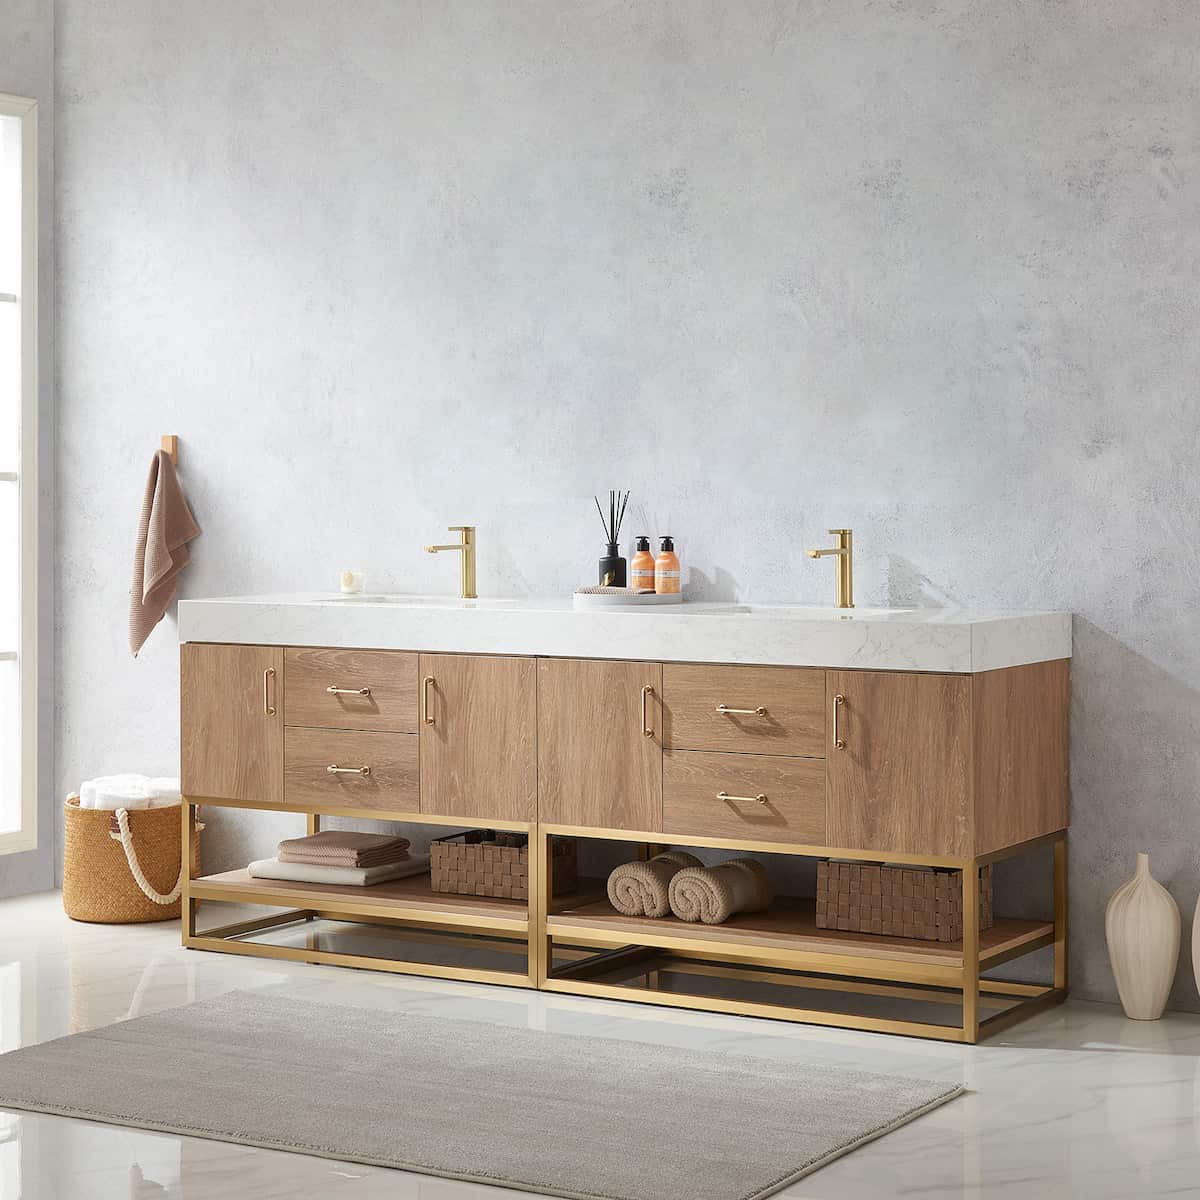 Vinnova Alistair 84 Inch Freestanding Double Vanity in North American Oak and Brushed Gold Frame with White Grain Stone Countertop Without Mirrors Side 789084-NO-GW-NM